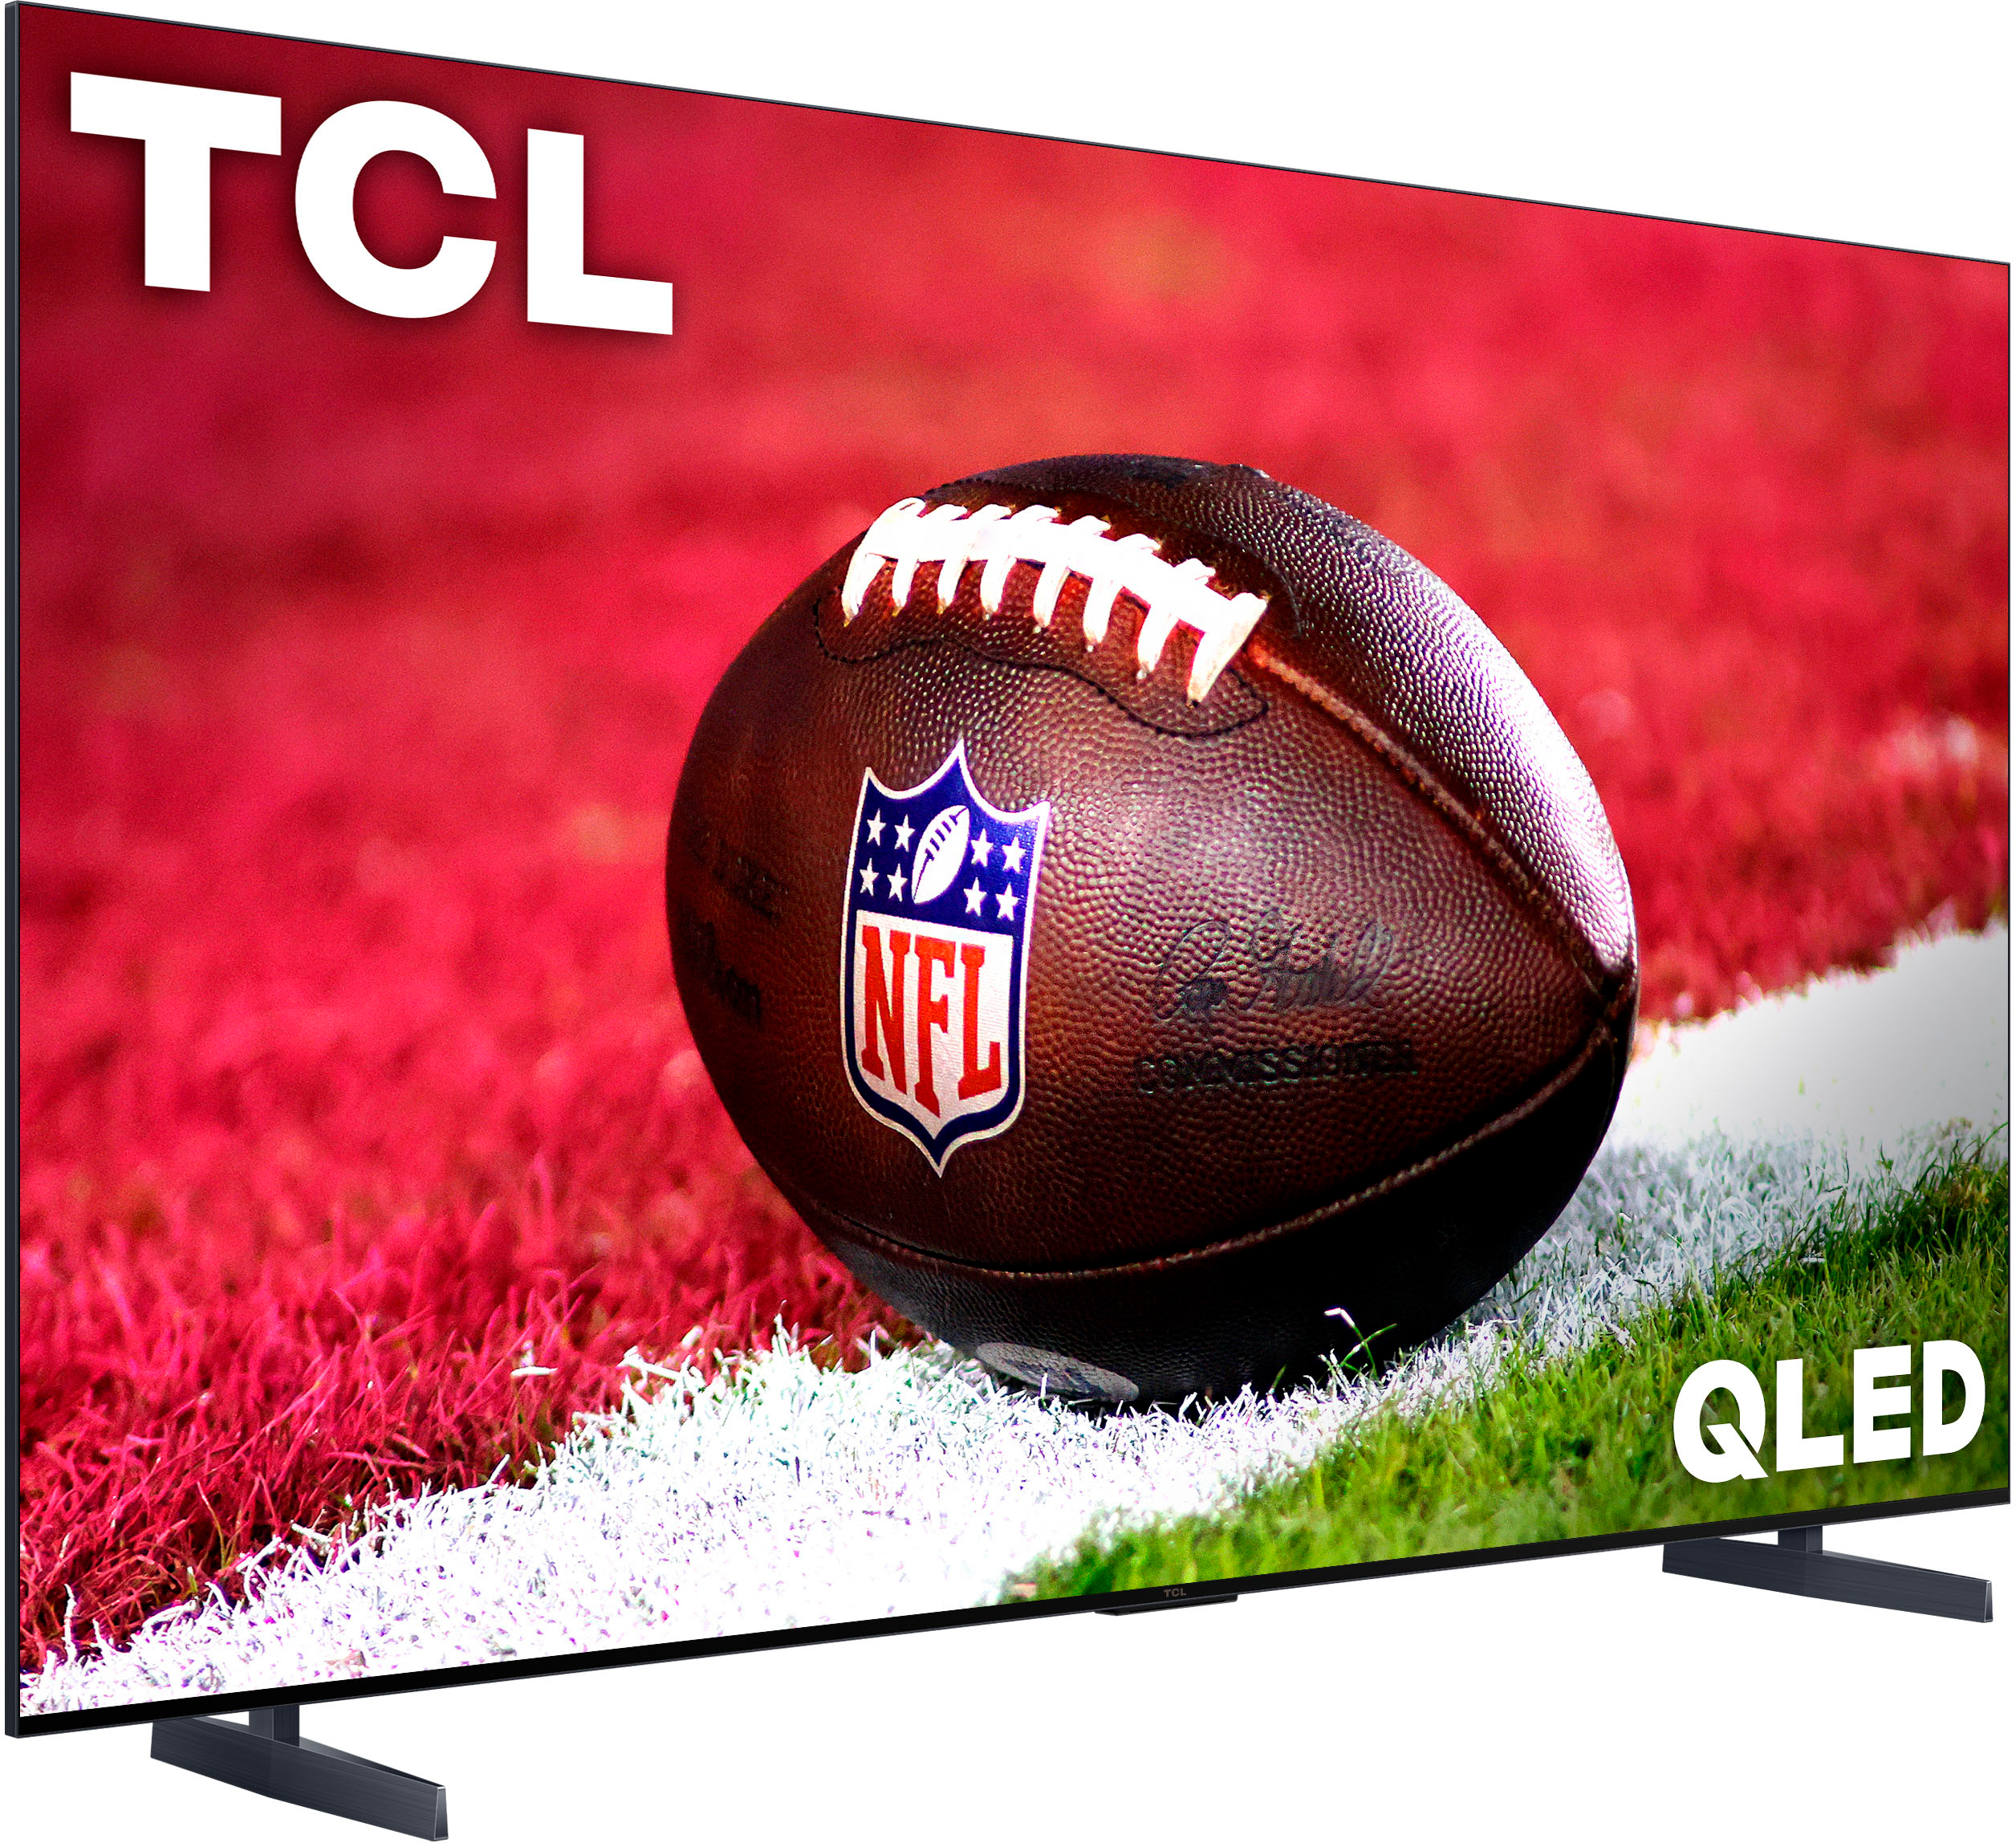 TCL 43-Inch Full HD, AI Android LED TV, Google Assistant, Google Play Store